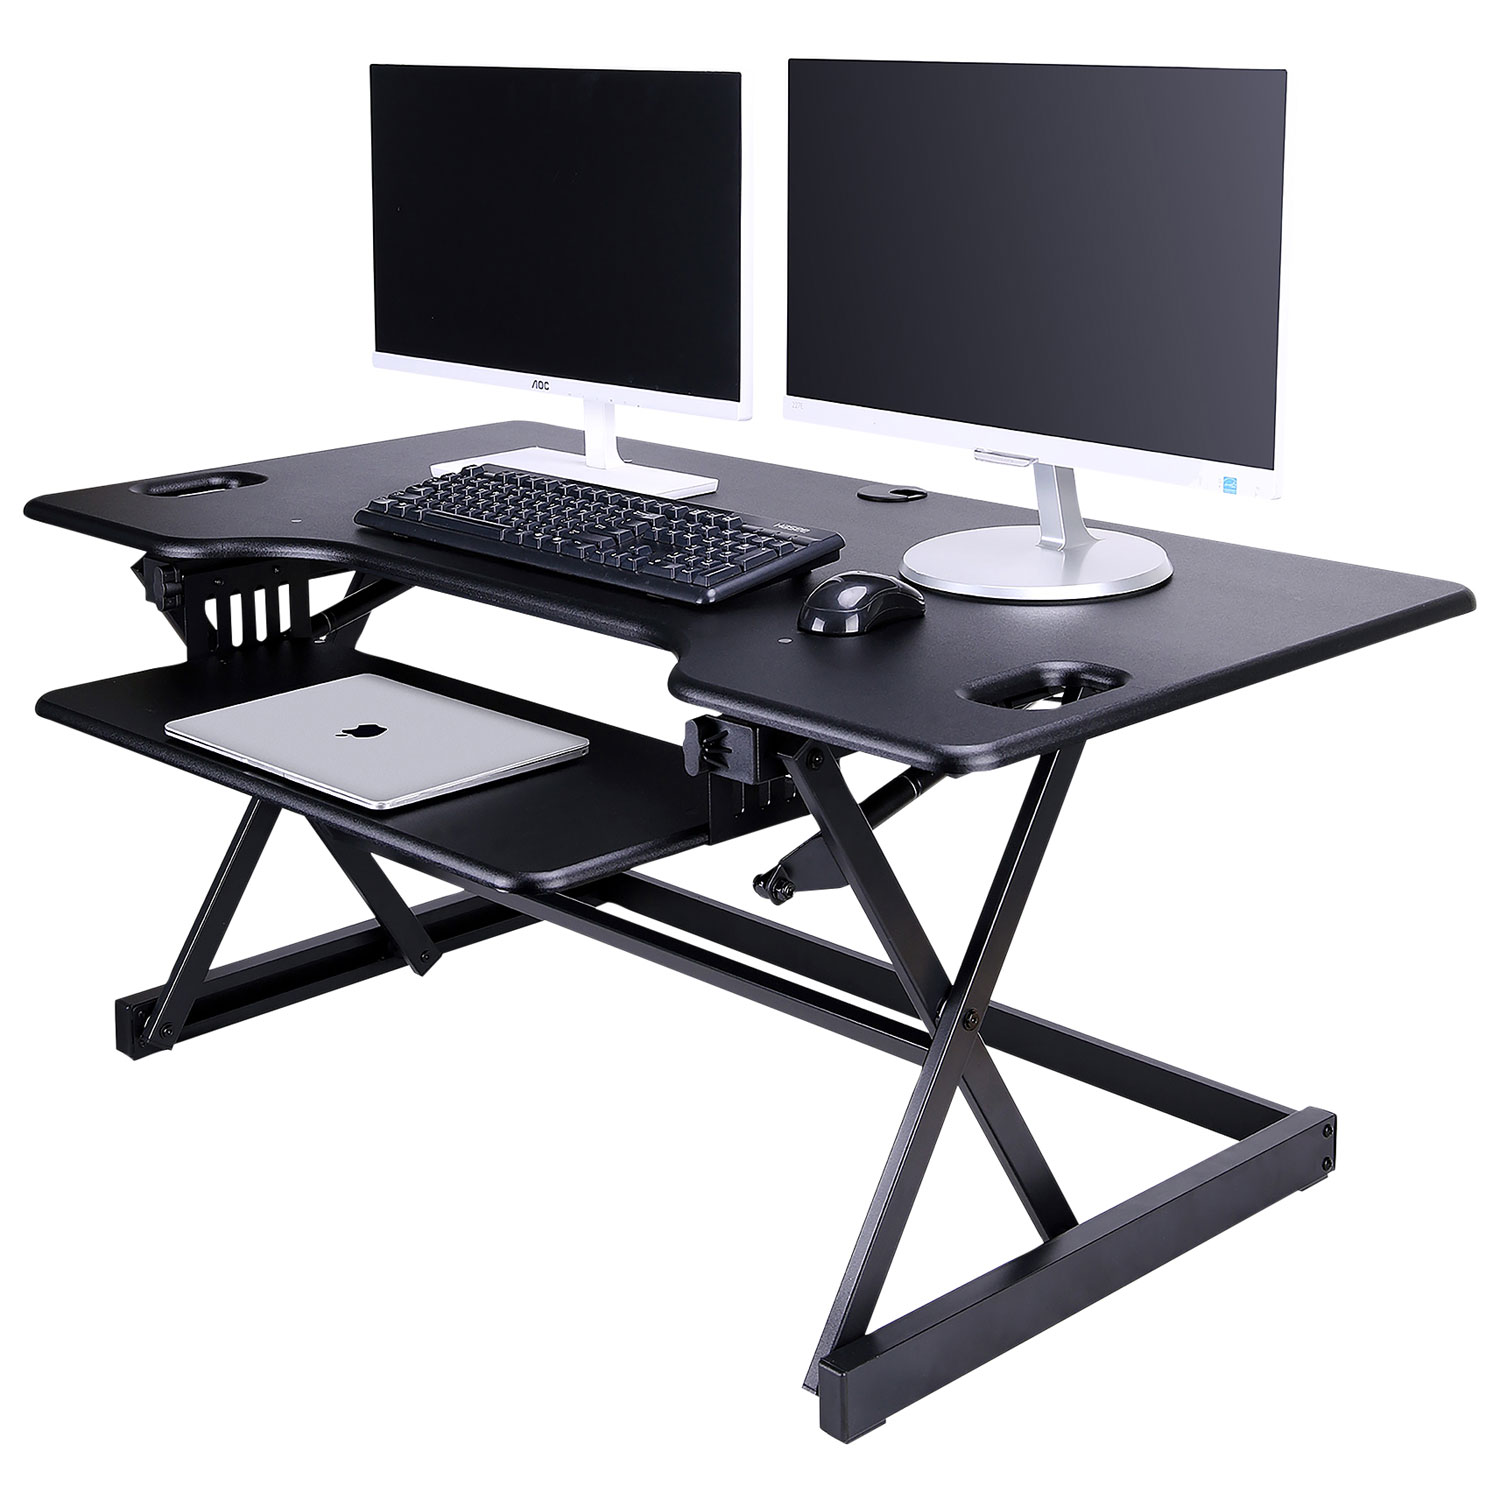 Rocelco DADR-46 Standing Desk Riser with Keyboard Tray - Black